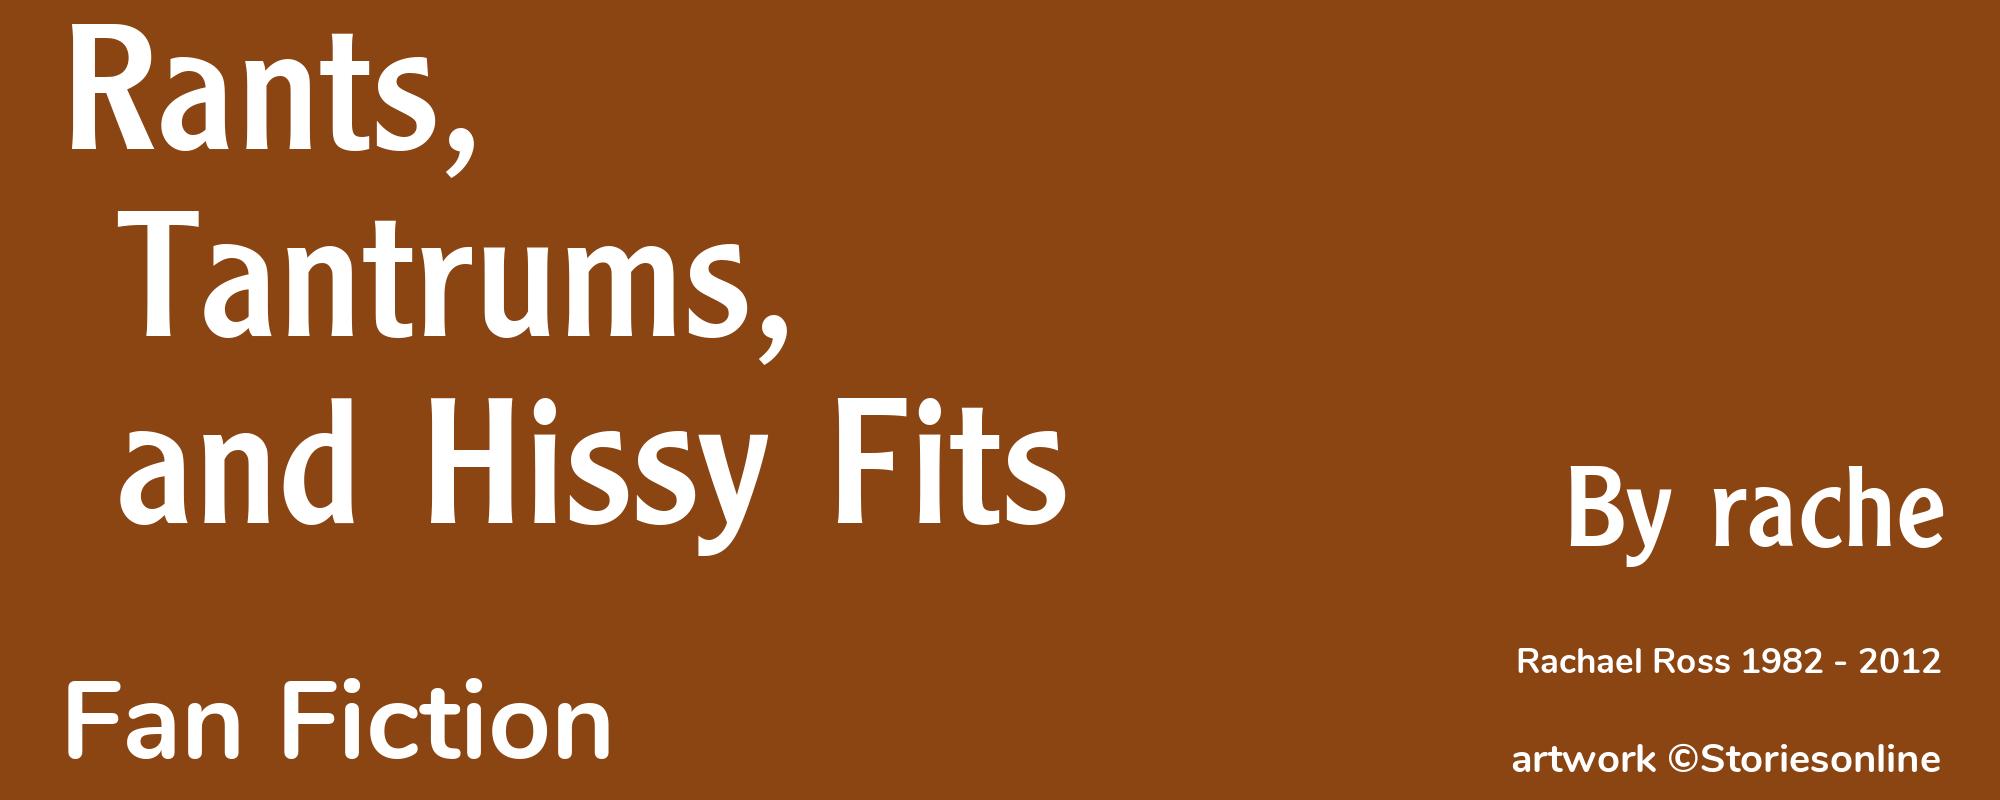 Rants, Tantrums, and Hissy Fits - Cover